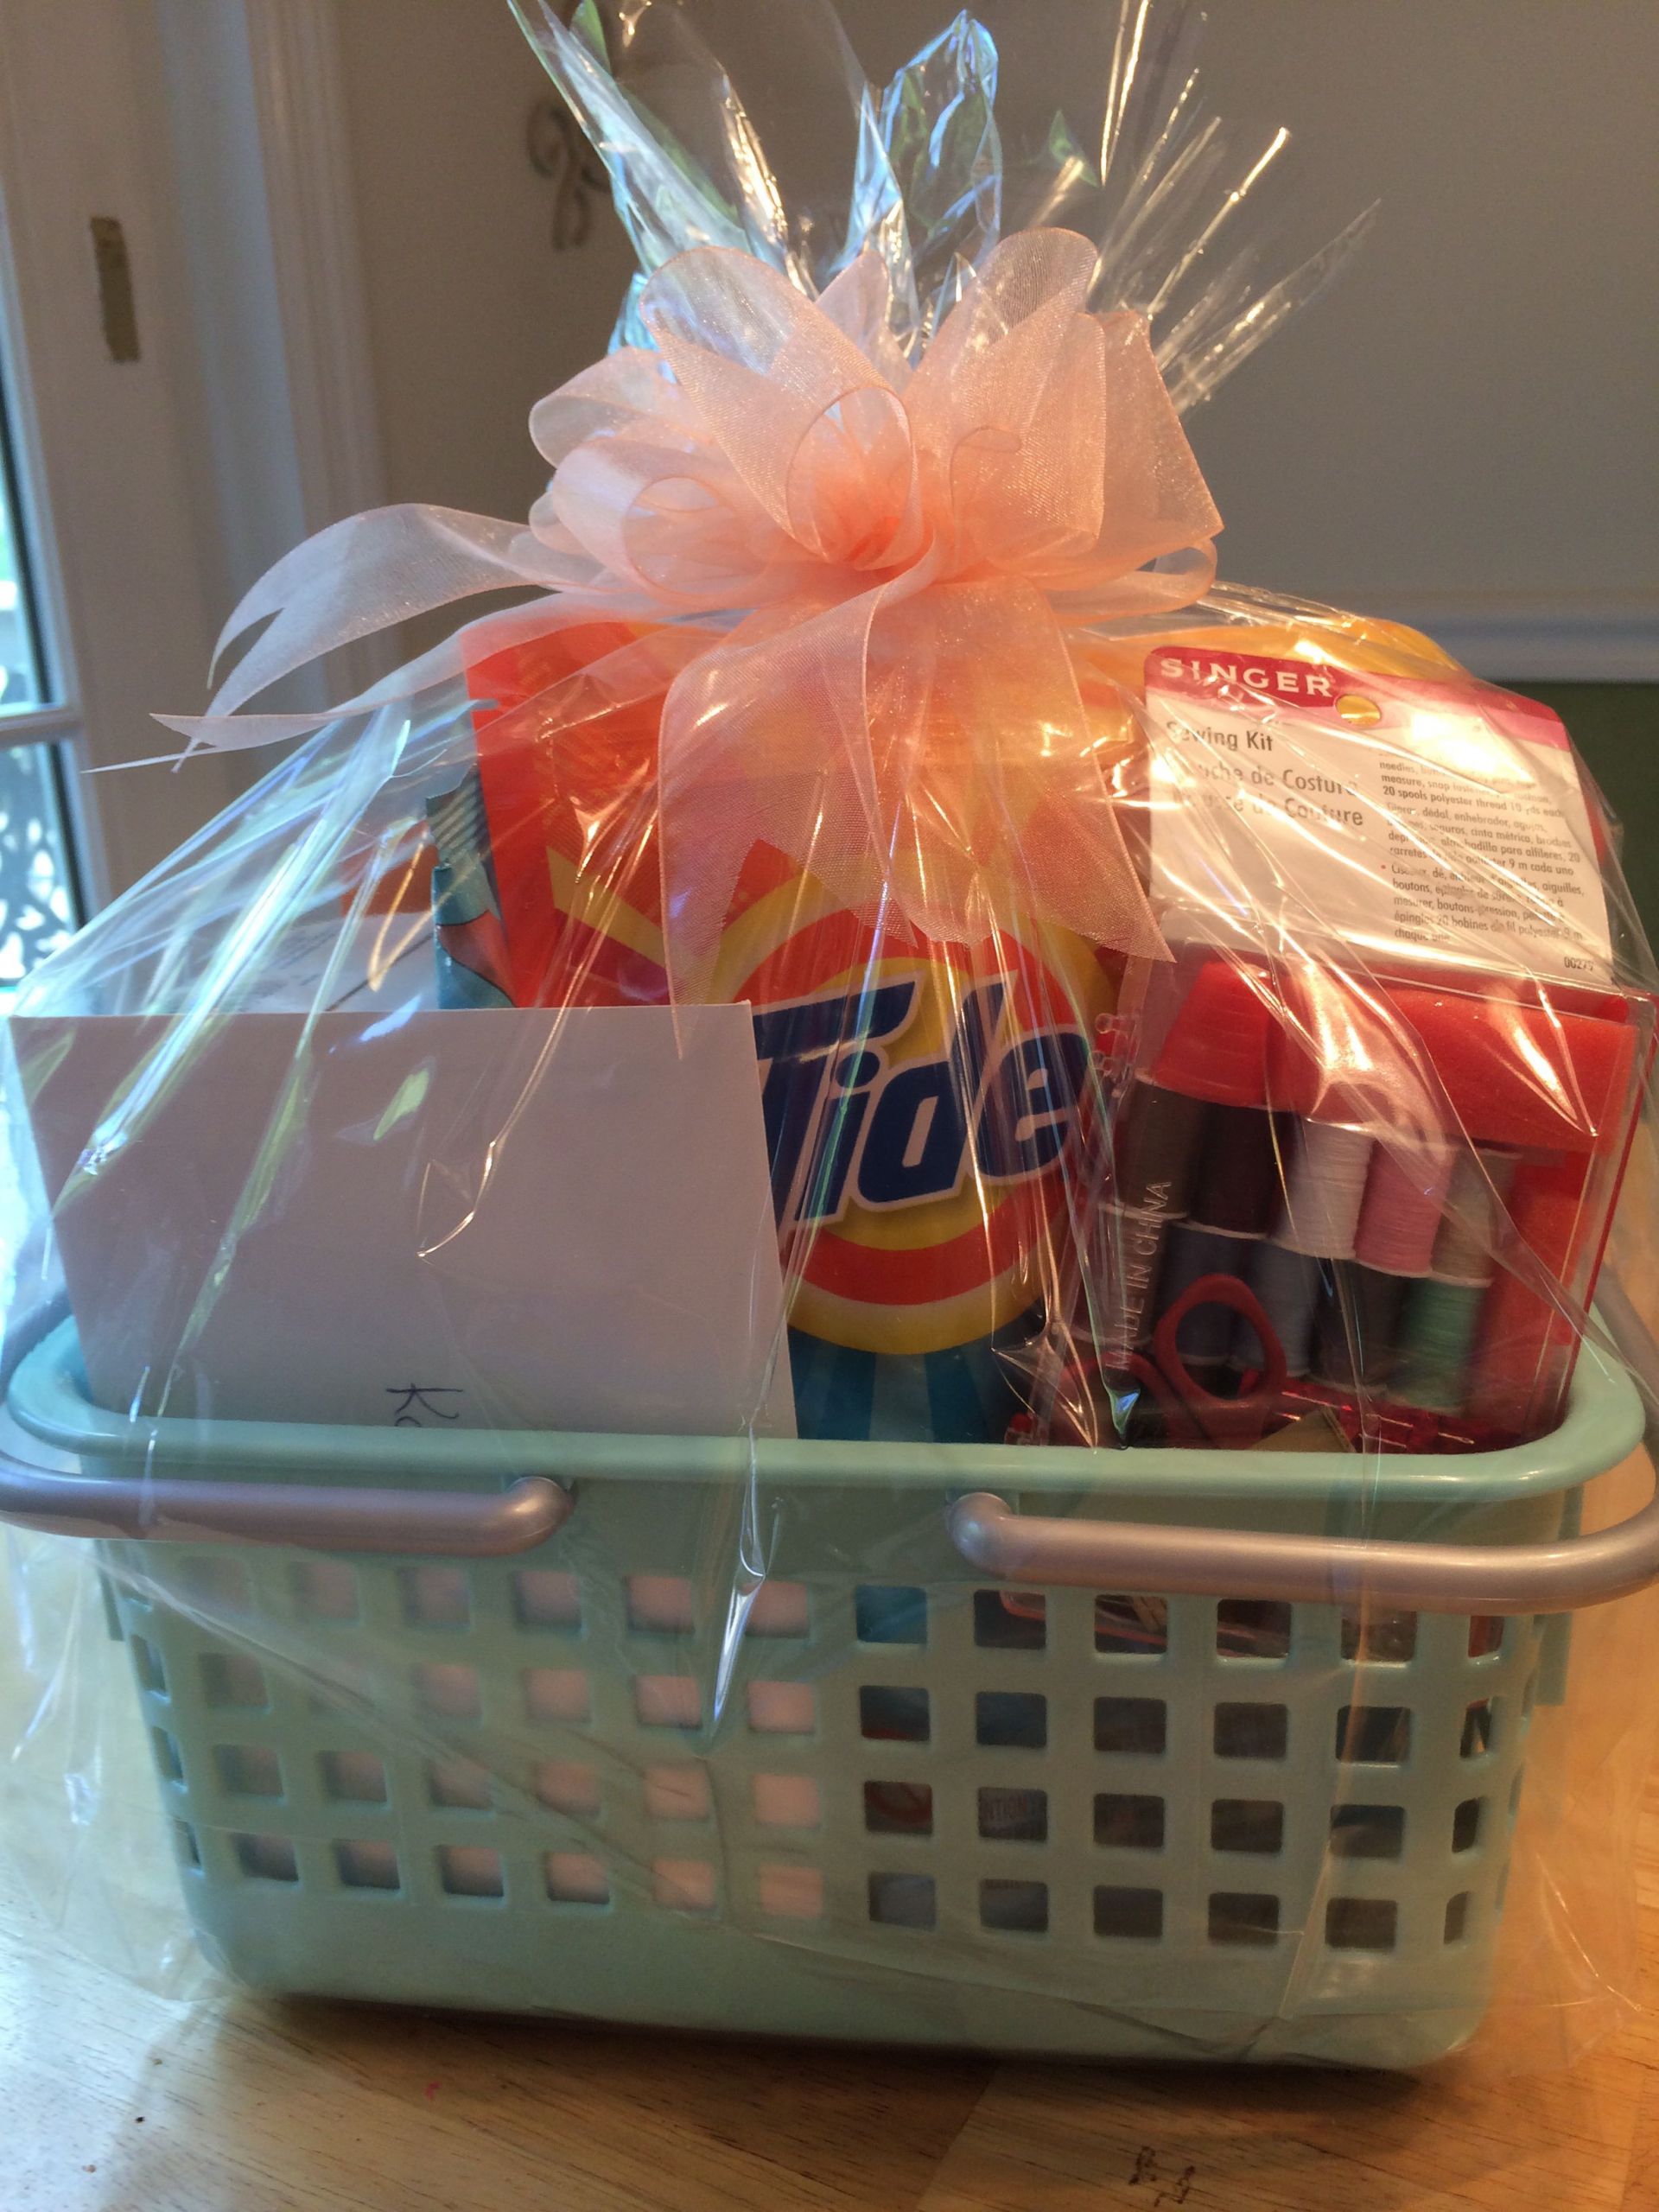 Laundry Gift Basket Ideas
 Going off to college t Just a few items and a cute